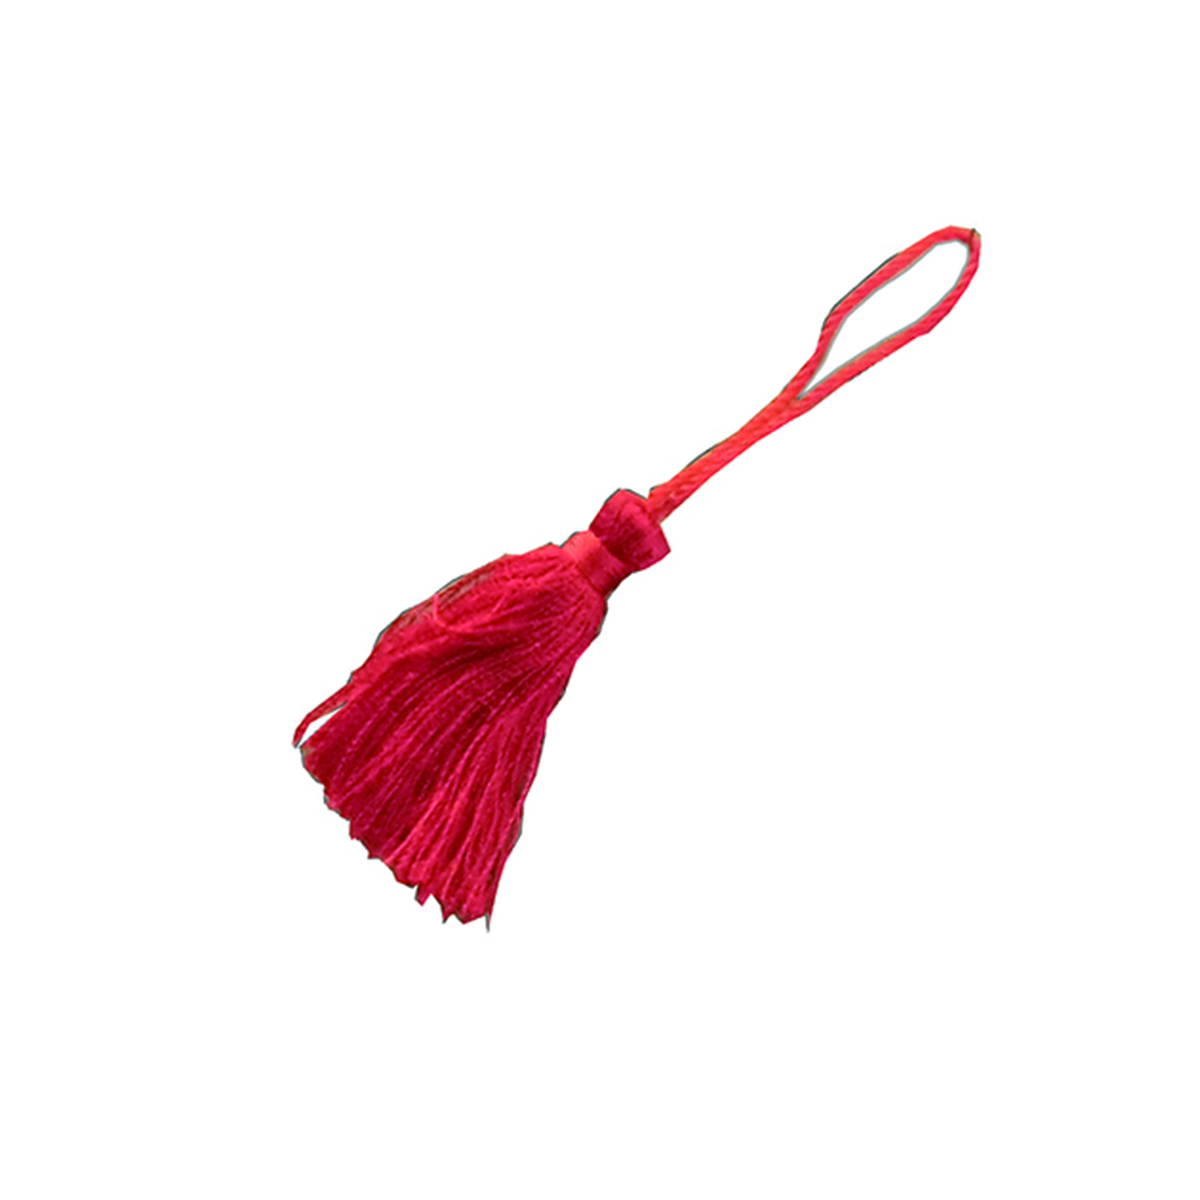 Tassels (small) red, 10 pieces, made in Japan, Chikyuya, hanging decoration, accessory, auspicious decoration